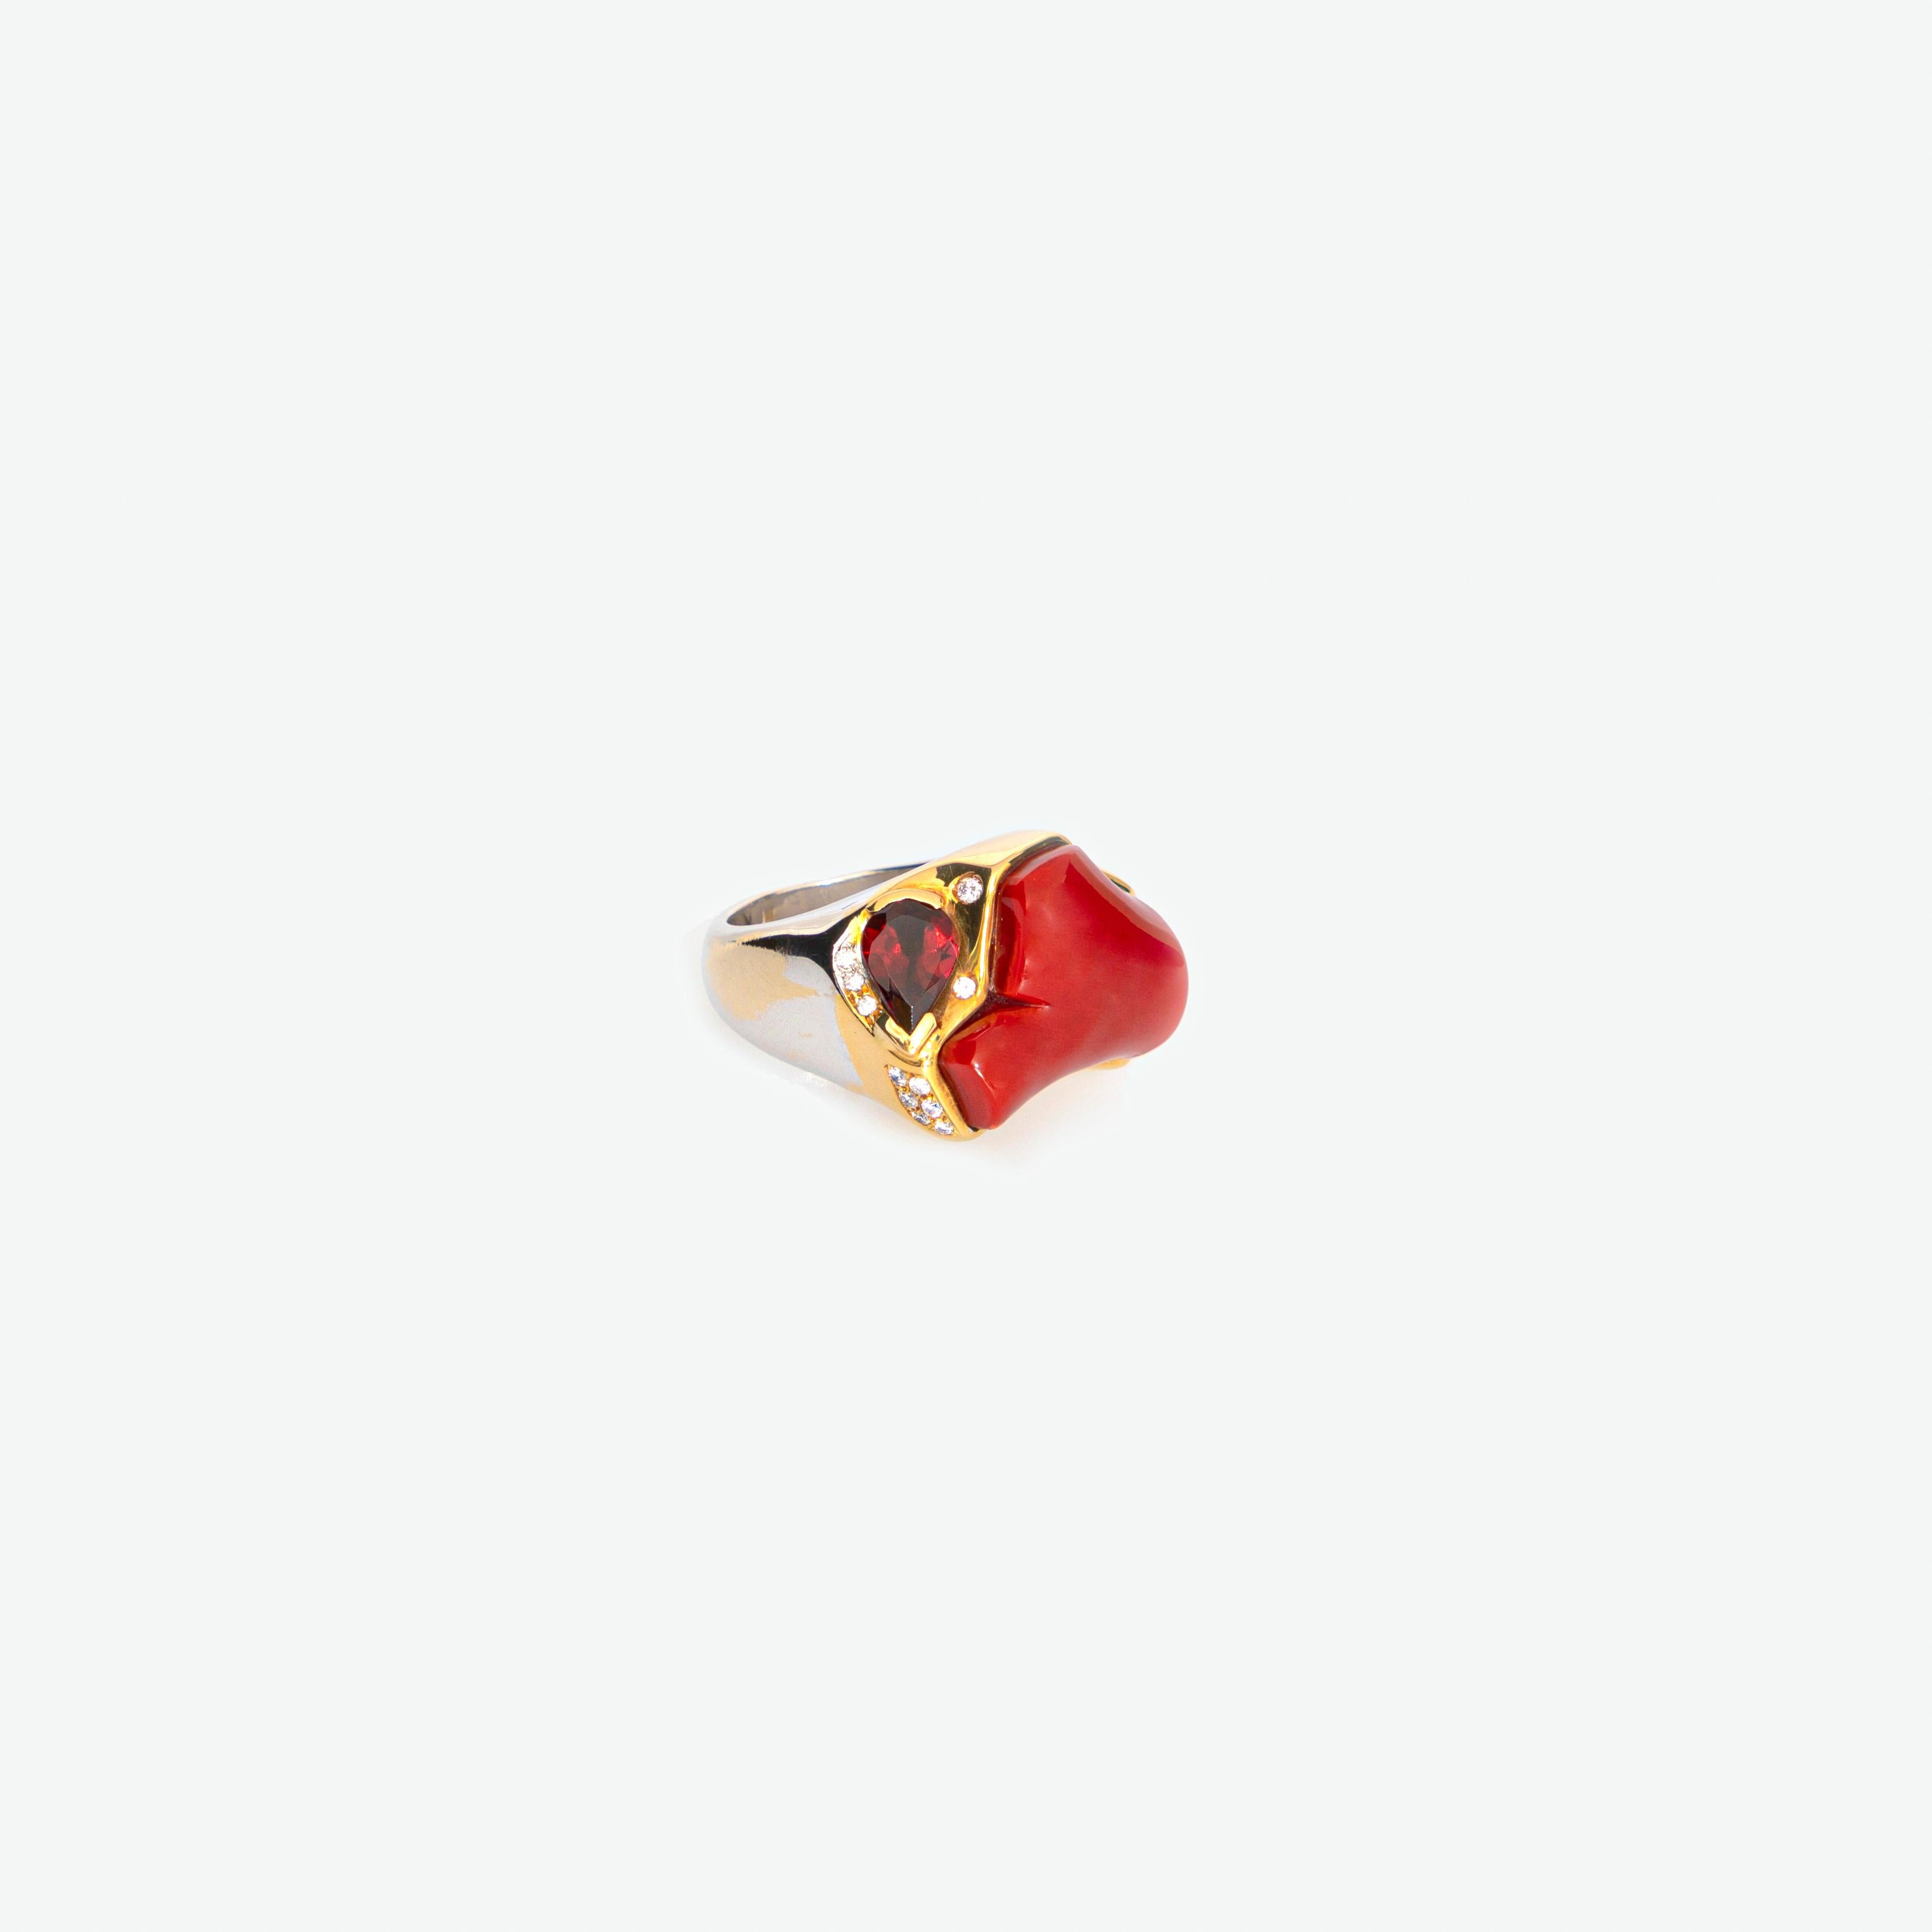 Rare and magnificent natural coral and almandine garnet gem surrounded by a mixed yellow-white gold ring embellished with diamonds. 

• 18k yellow-mix-white gold
• Carat total weight of diamonds 0.38 over 17 gems
• Total weight 28 g
• Size: 7 (US),